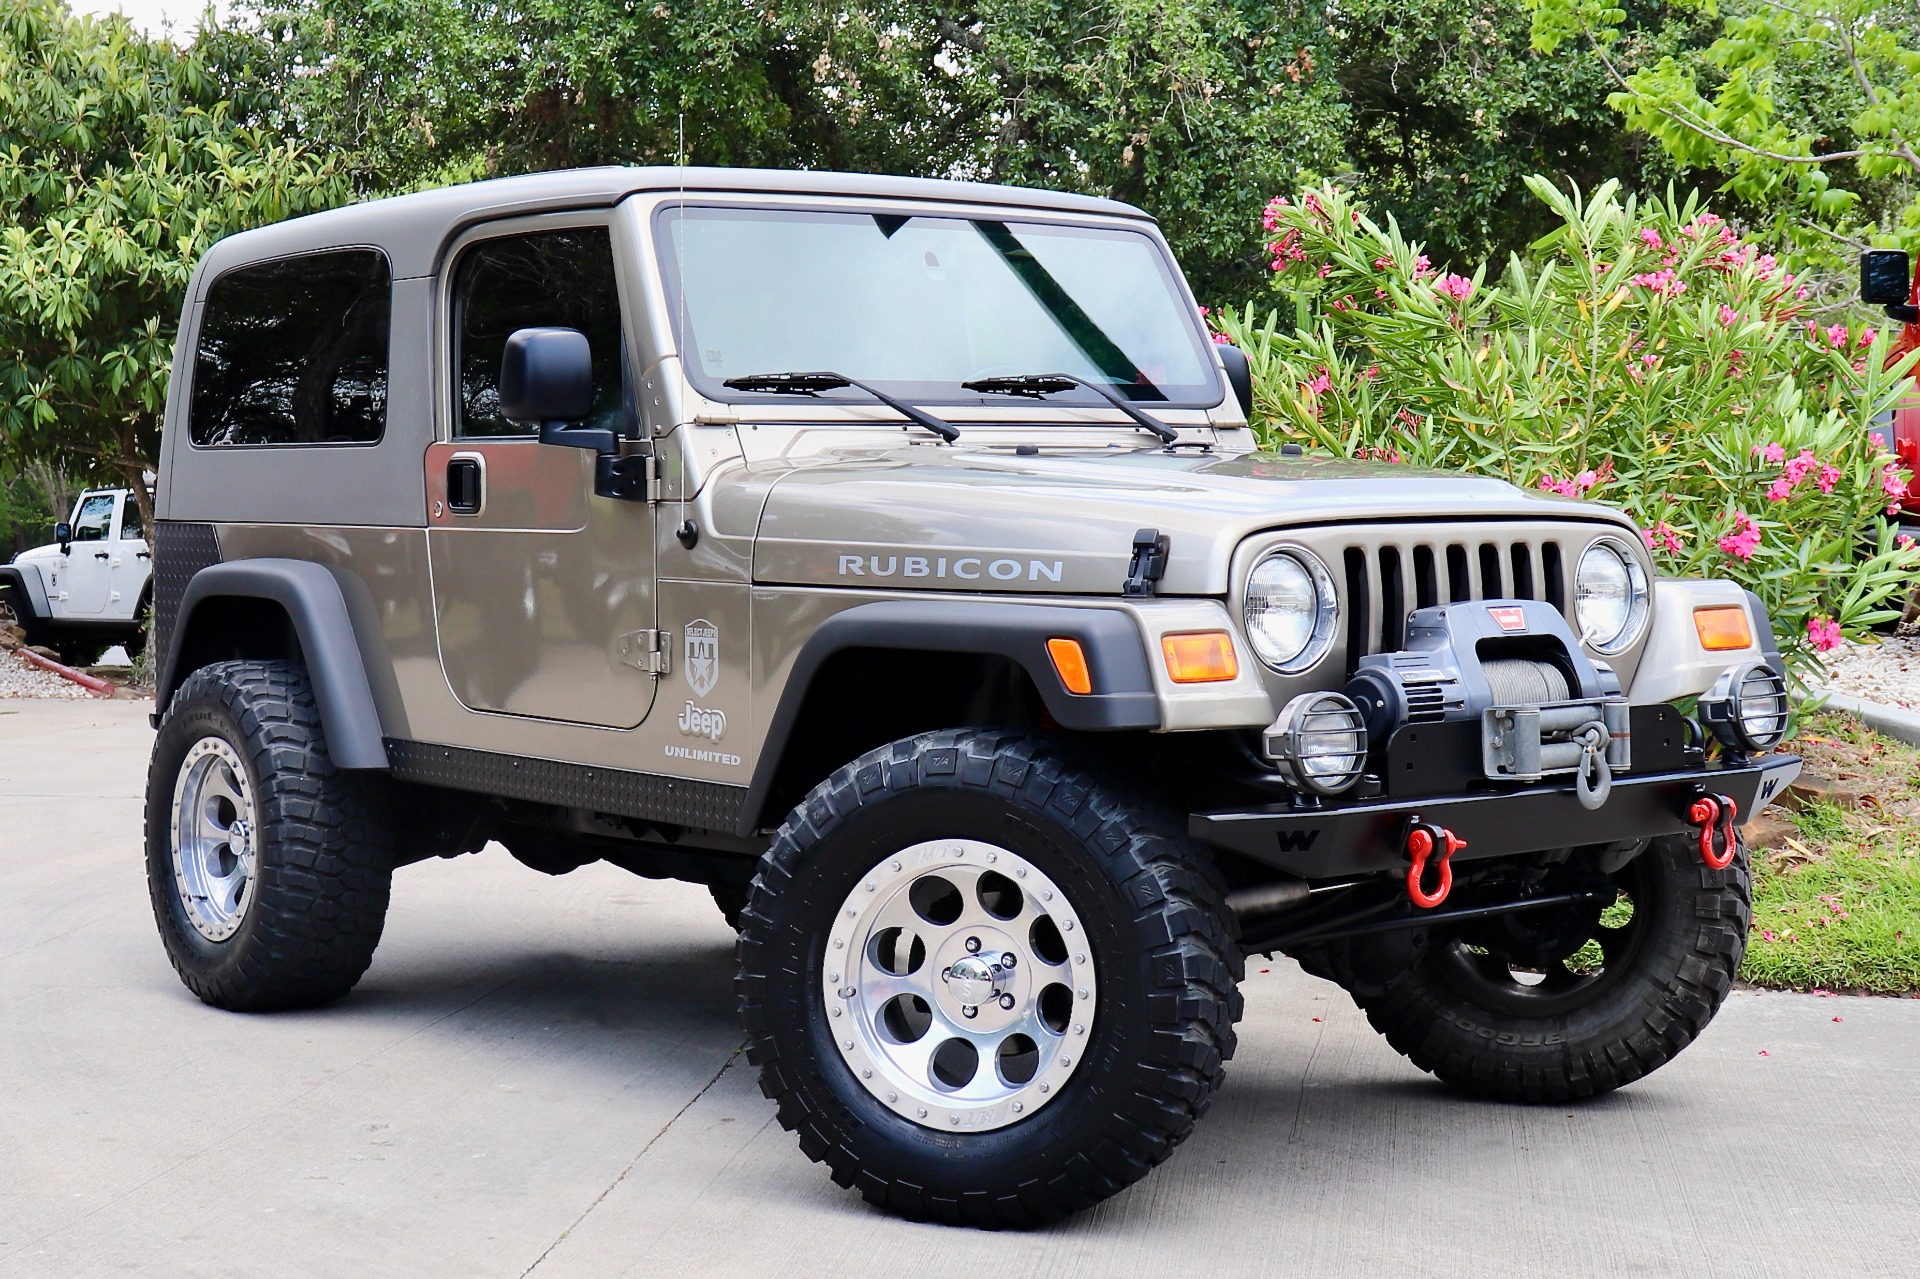 Used 2005 Jeep Wrangler Unlimited Rubicon For Sale ($36,995) | Select Jeeps  Inc. Stock #327064